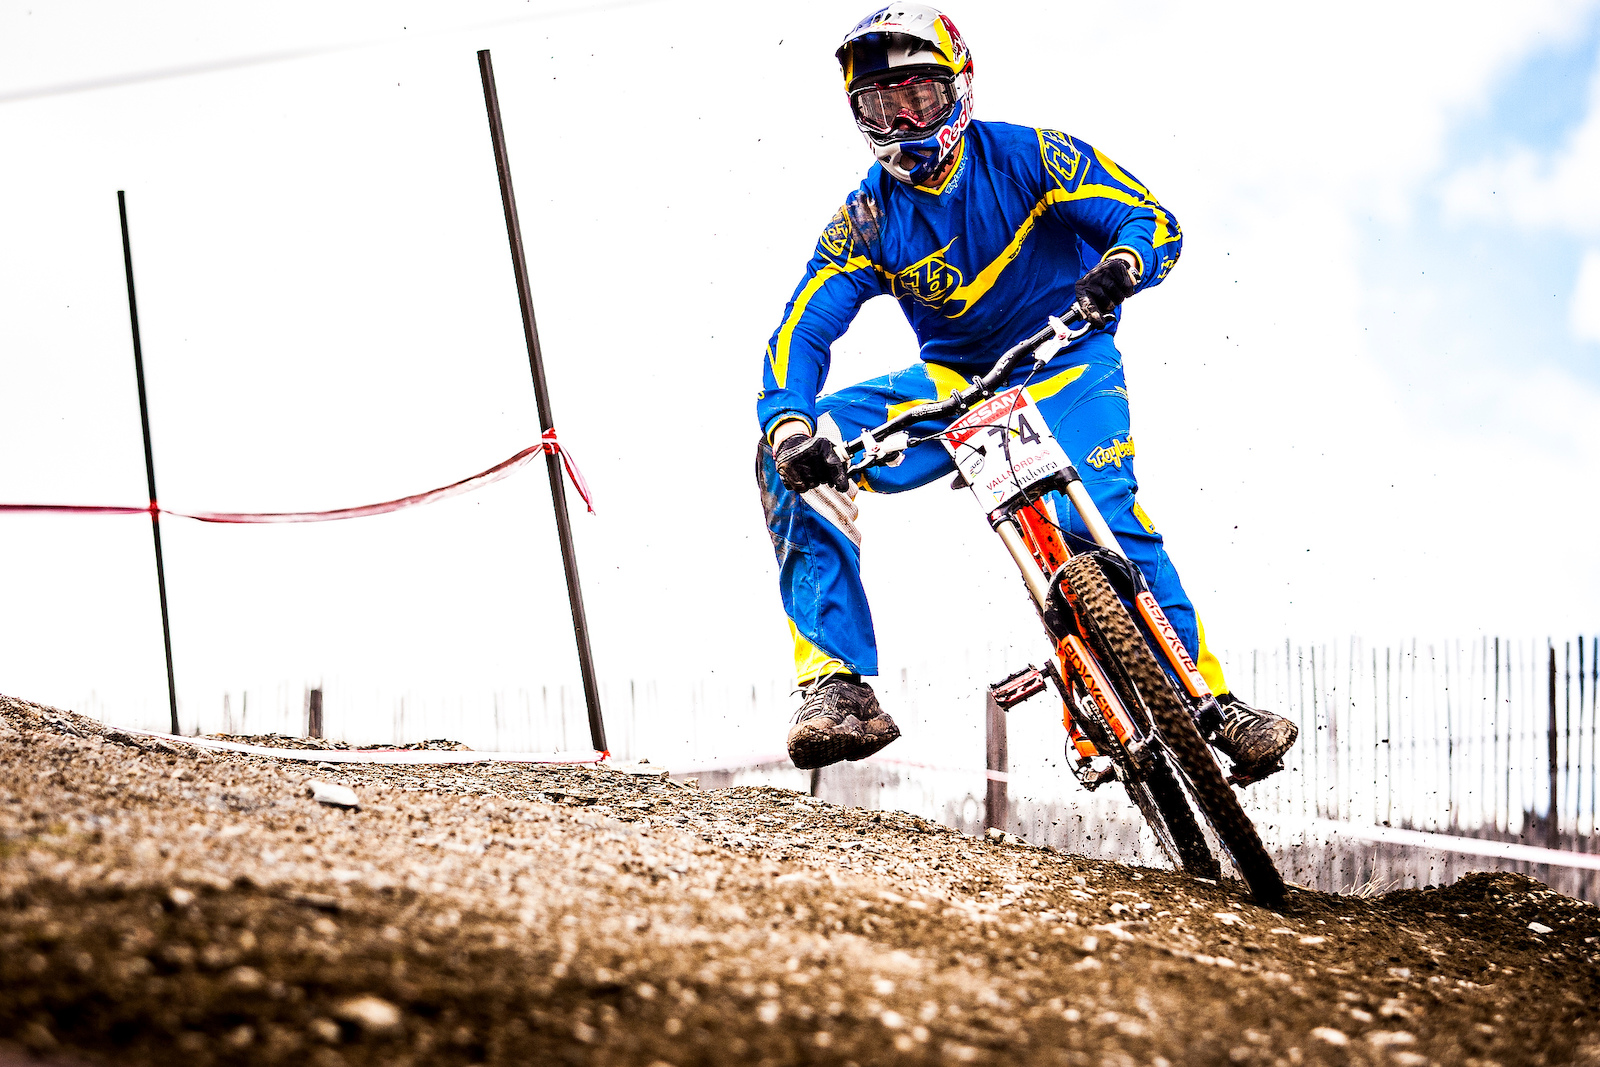  during the Nissan UCI MTB world cup presented by Shimano at Vallnord Andorra. Photo Sven Martin